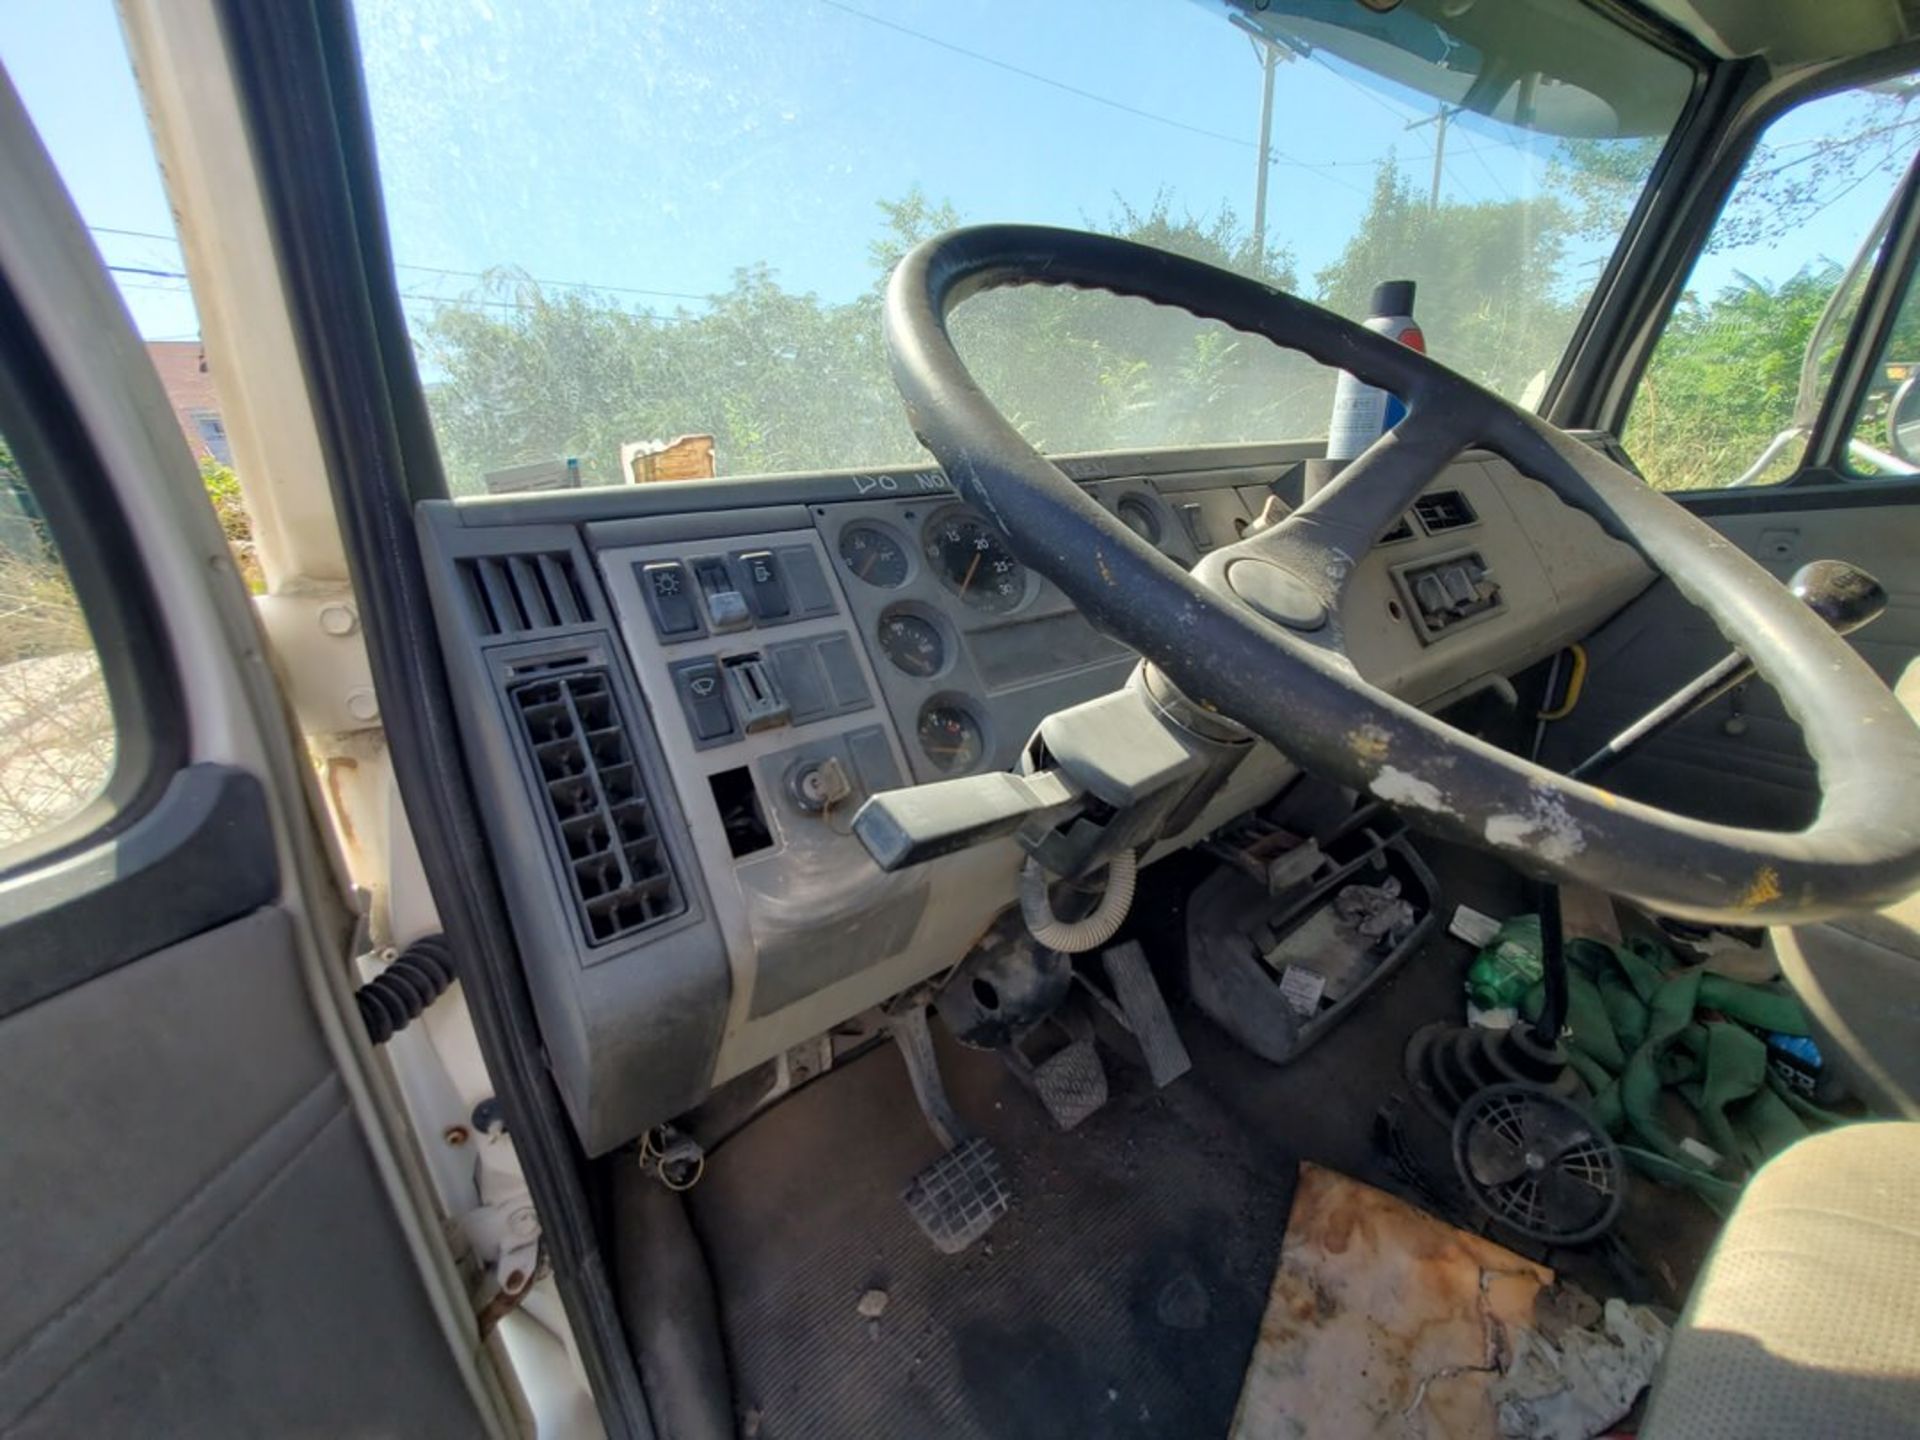 1999 Freightliner Semi-Truck 6-Speed Vin: 1FV6HFAA; 14,369 Miles; W/ Paint Trailer (No Plate Pic) - Image 17 of 18